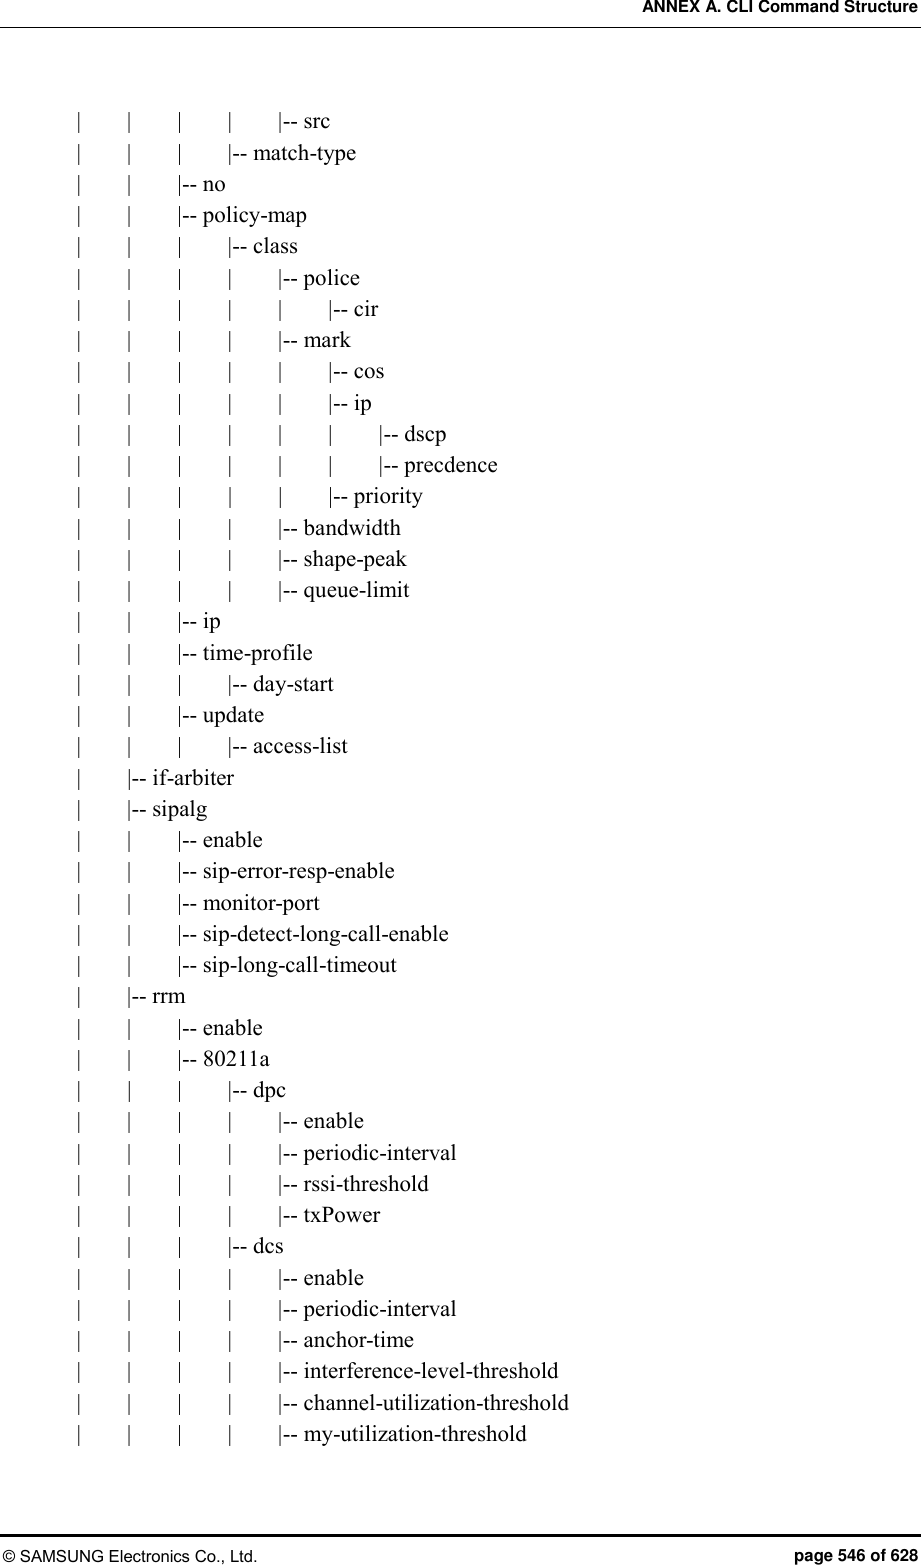 ANNEX A. CLI Command Structure © SAMSUNG Electronics Co., Ltd.  page 546 of 628 |        |        |        |        |-- src |        |        |        |-- match-type |        |        |-- no |        |        |-- policy-map |        |        |        |-- class |        |        |        |        |-- police |        |        |        |        |        |-- cir |        |        |        |        |-- mark |        |        |        |        |        |-- cos |        |        |        |        |        |-- ip |        |        |        |        |        |        |-- dscp |        |        |        |        |        |        |-- precdence |        |        |        |        |        |-- priority |        |        |        |        |-- bandwidth |        |        |        |        |-- shape-peak |        |        |        |        |-- queue-limit |        |        |-- ip |        |        |-- time-profile |        |        |        |-- day-start |        |        |-- update |        |        |        |-- access-list |     |-- if-arbiter |        |-- sipalg |        |        |-- enable |        |        |-- sip-error-resp-enable |        |        |-- monitor-port |        |        |-- sip-detect-long-call-enable |        |        |-- sip-long-call-timeout |        |-- rrm |        |        |-- enable |        |        |-- 80211a |        |        |        |-- dpc |        |        |        |        |-- enable |        |        |        |        |-- periodic-interval |        |        |        |        |-- rssi-threshold |        |        |        |        |-- txPower |        |        |        |-- dcs |        |        |        |        |-- enable |        |        |        |        |-- periodic-interval |        |        |        |        |-- anchor-time |        |        |        |        |-- interference-level-threshold |        |        |        |        |-- channel-utilization-threshold |        |        |        |        |-- my-utilization-threshold 